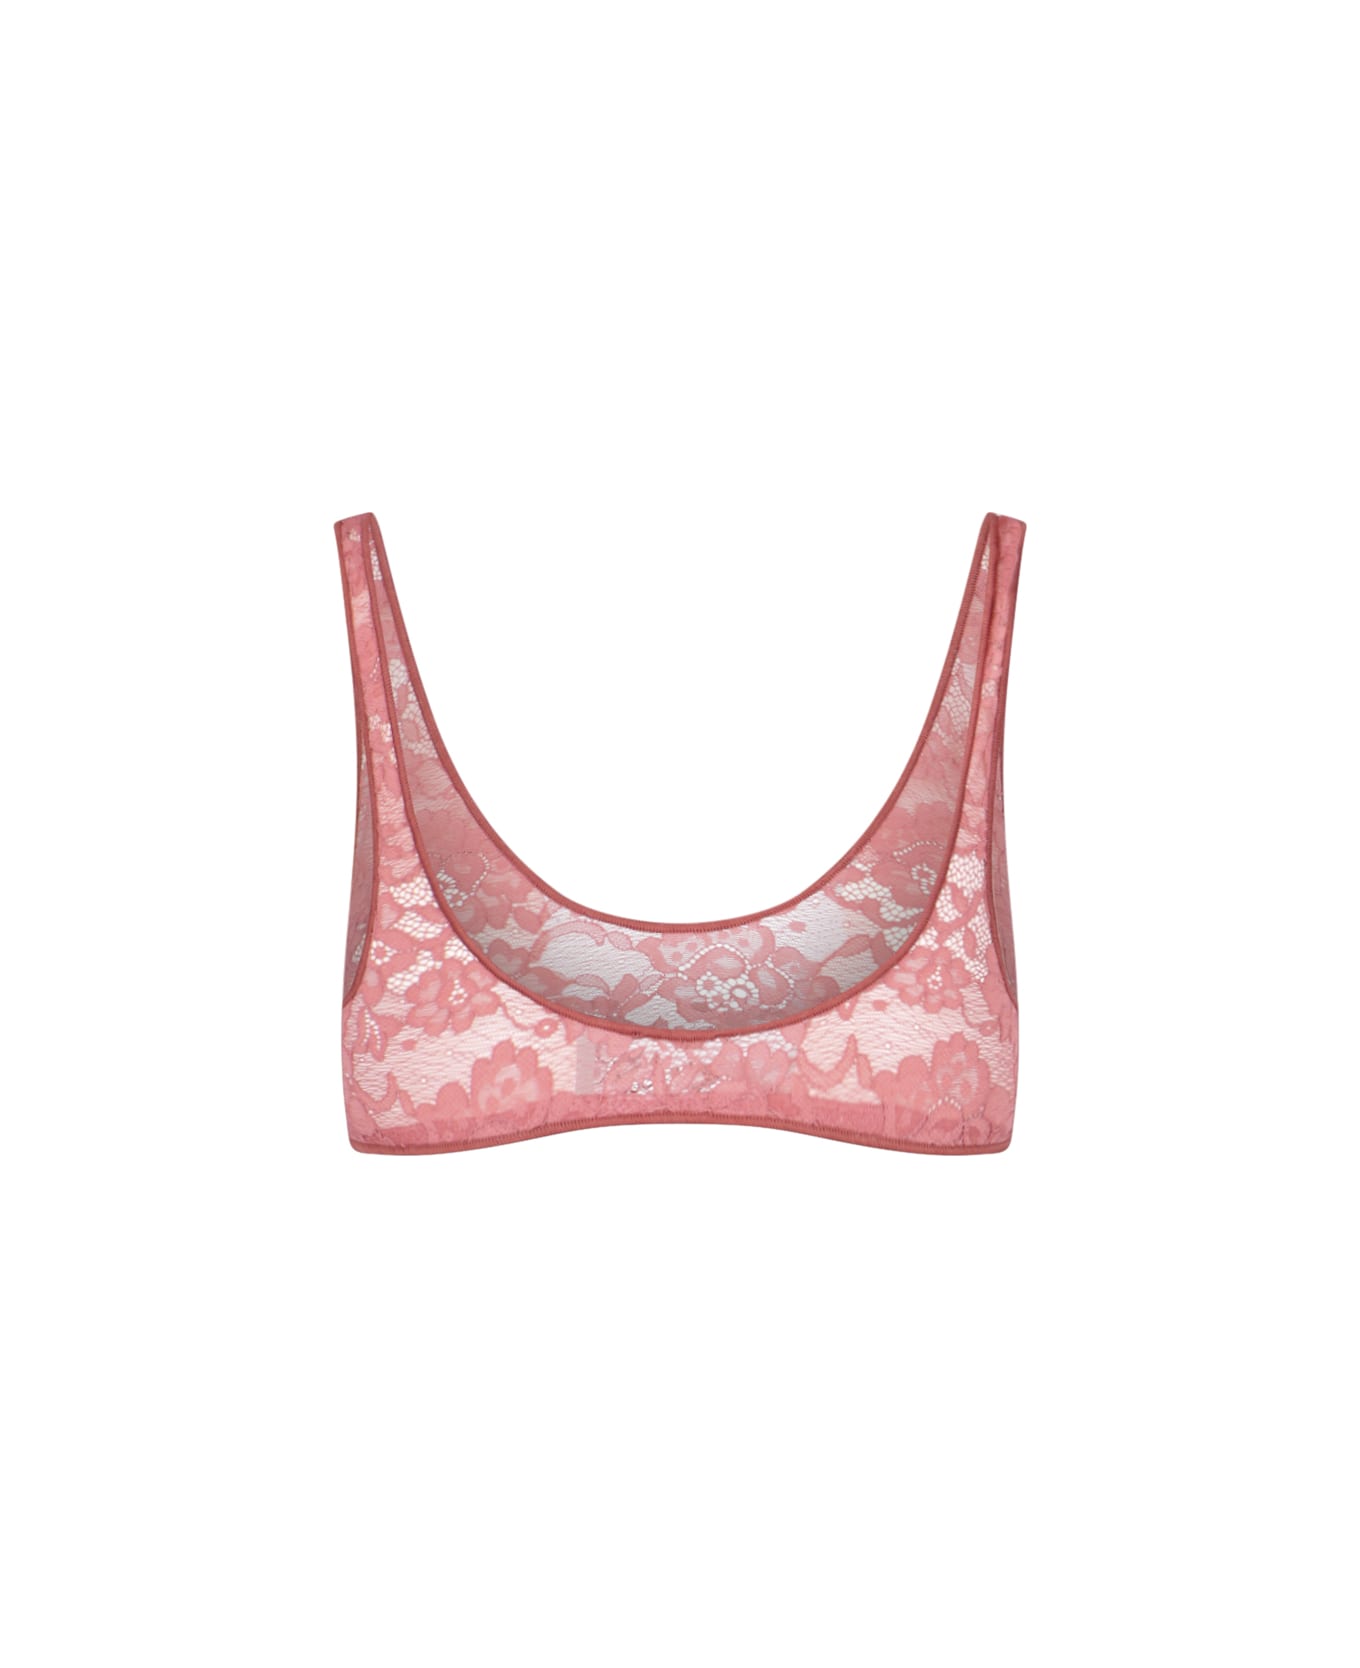 Oseree 'o-lover Lace Sporty' Bra - Pink ランジェリー＆パジャマ